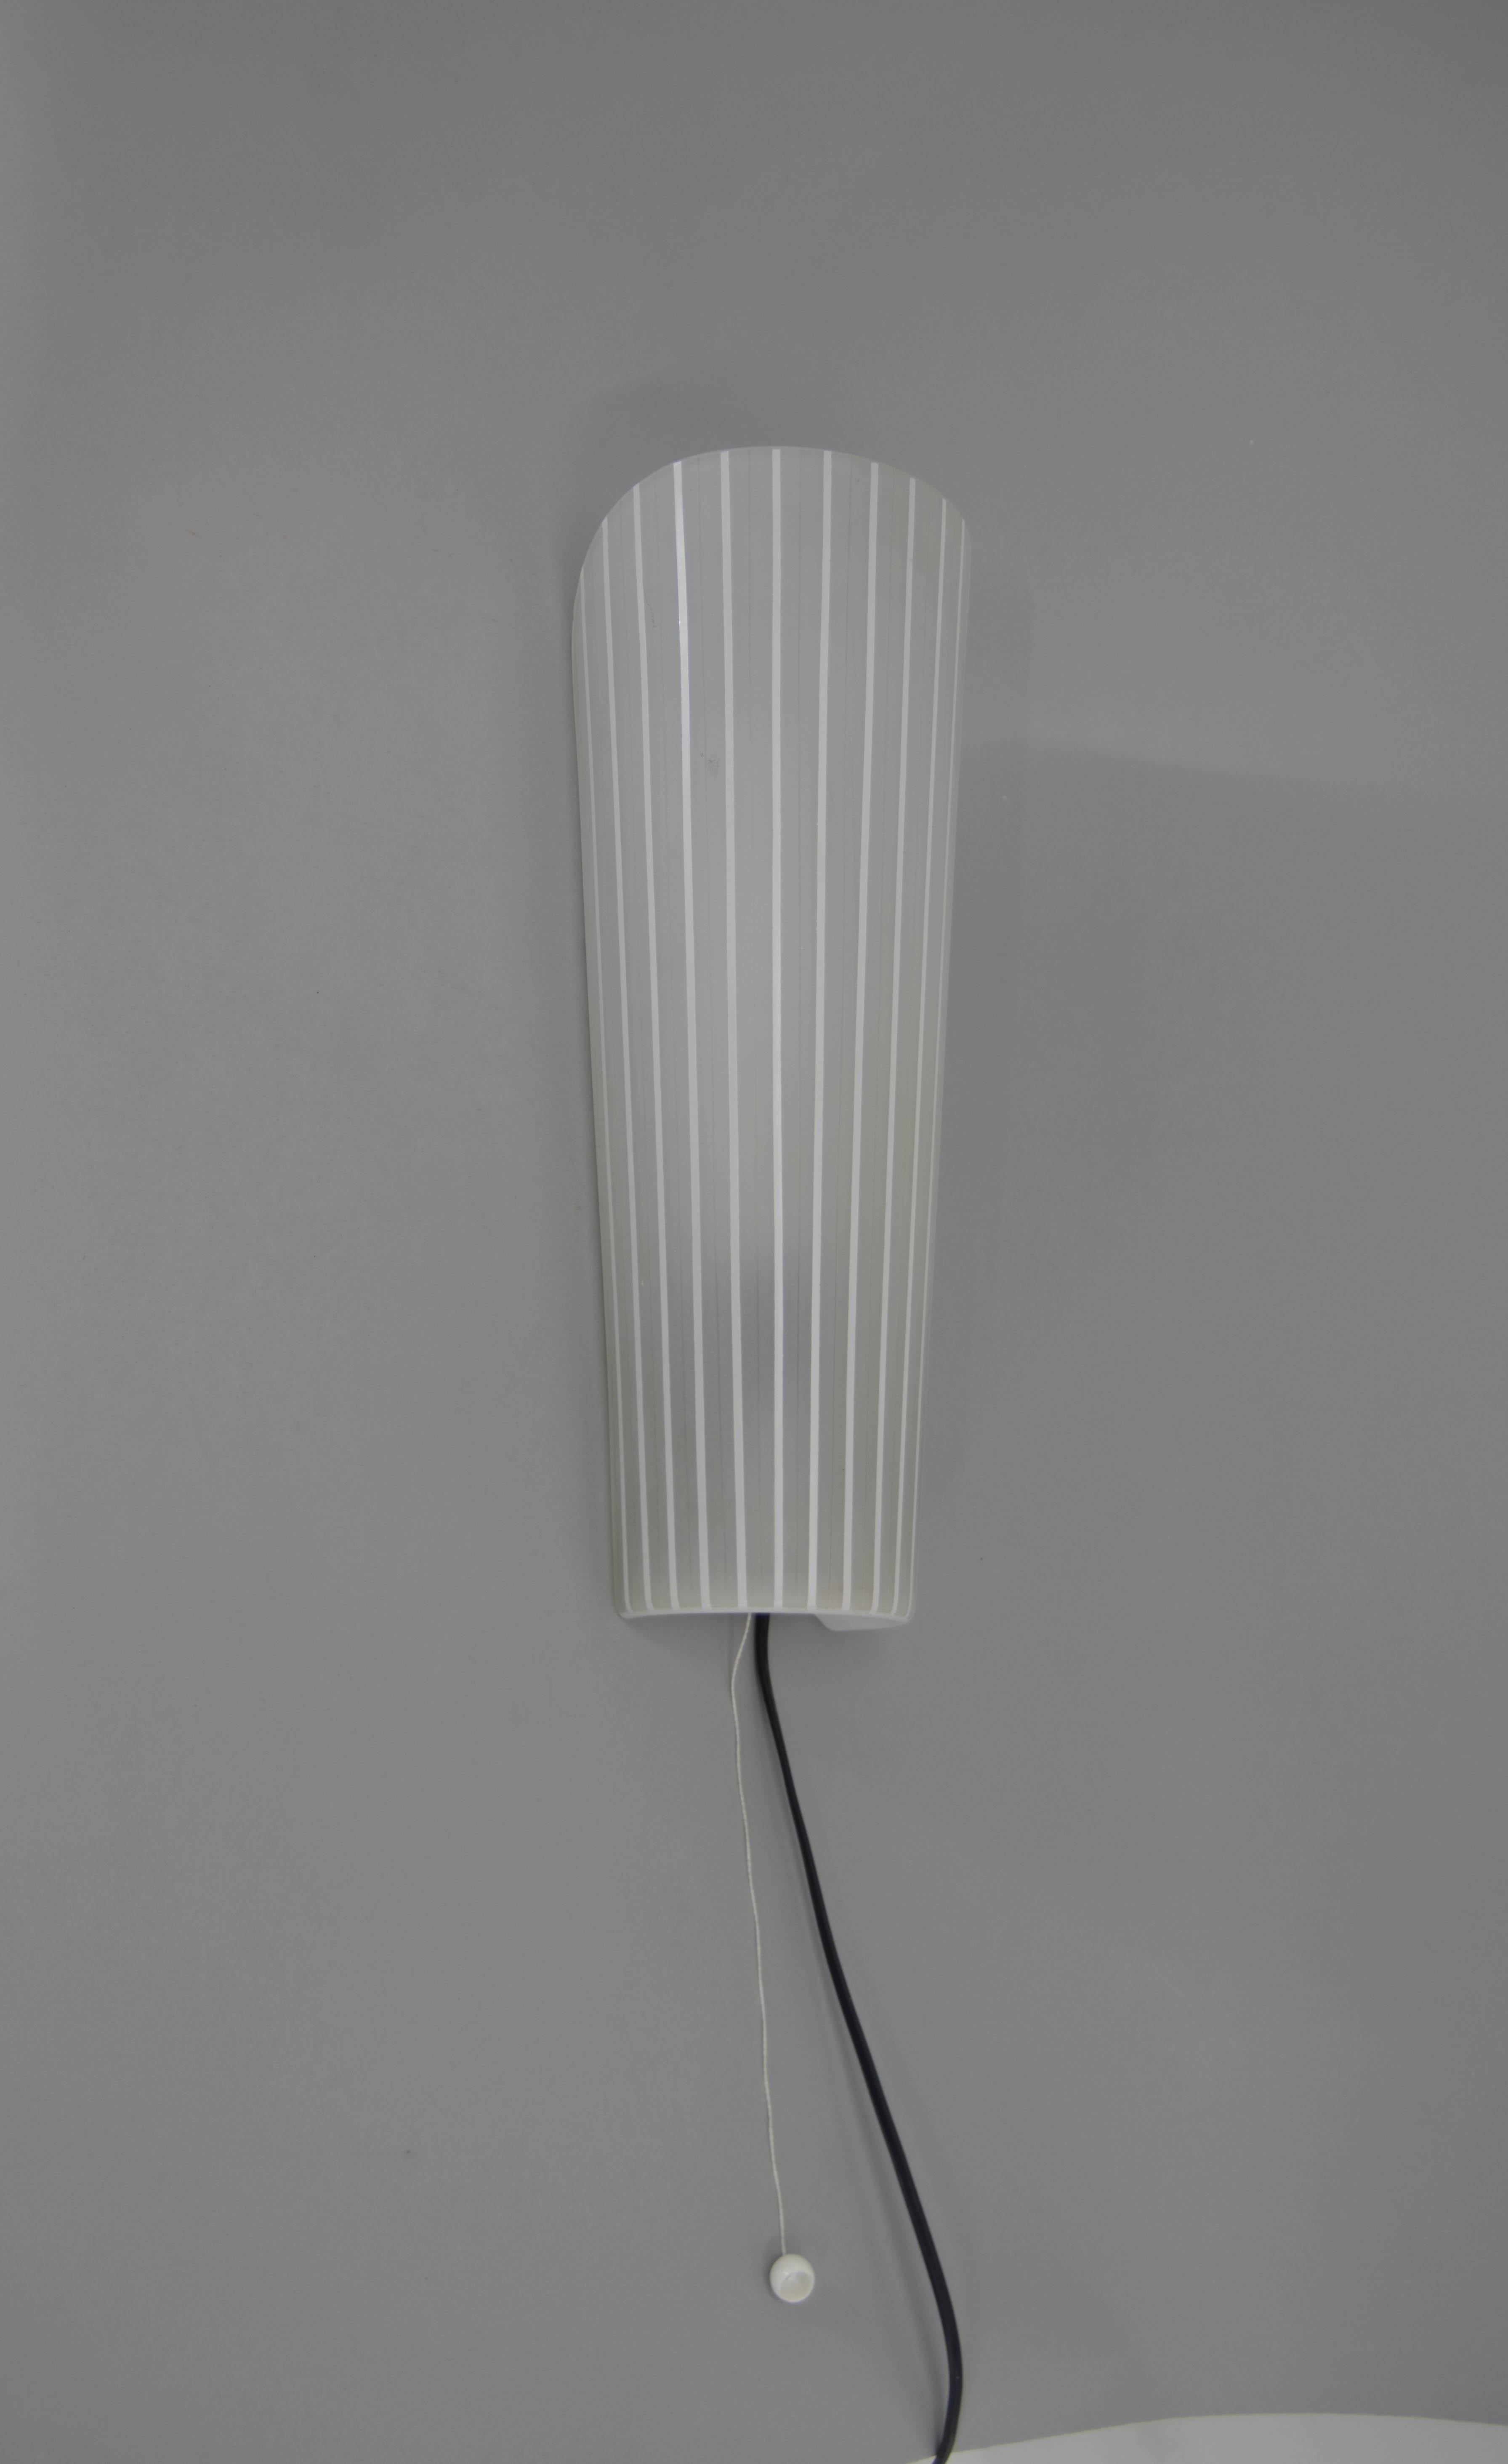 Glass wall lamp made in Europe circa 1970s.
Minor chips on a glass on top edge and inside barely visible.
Rewired: 1x40W, E12-E14 bulb
US wiring compatible.